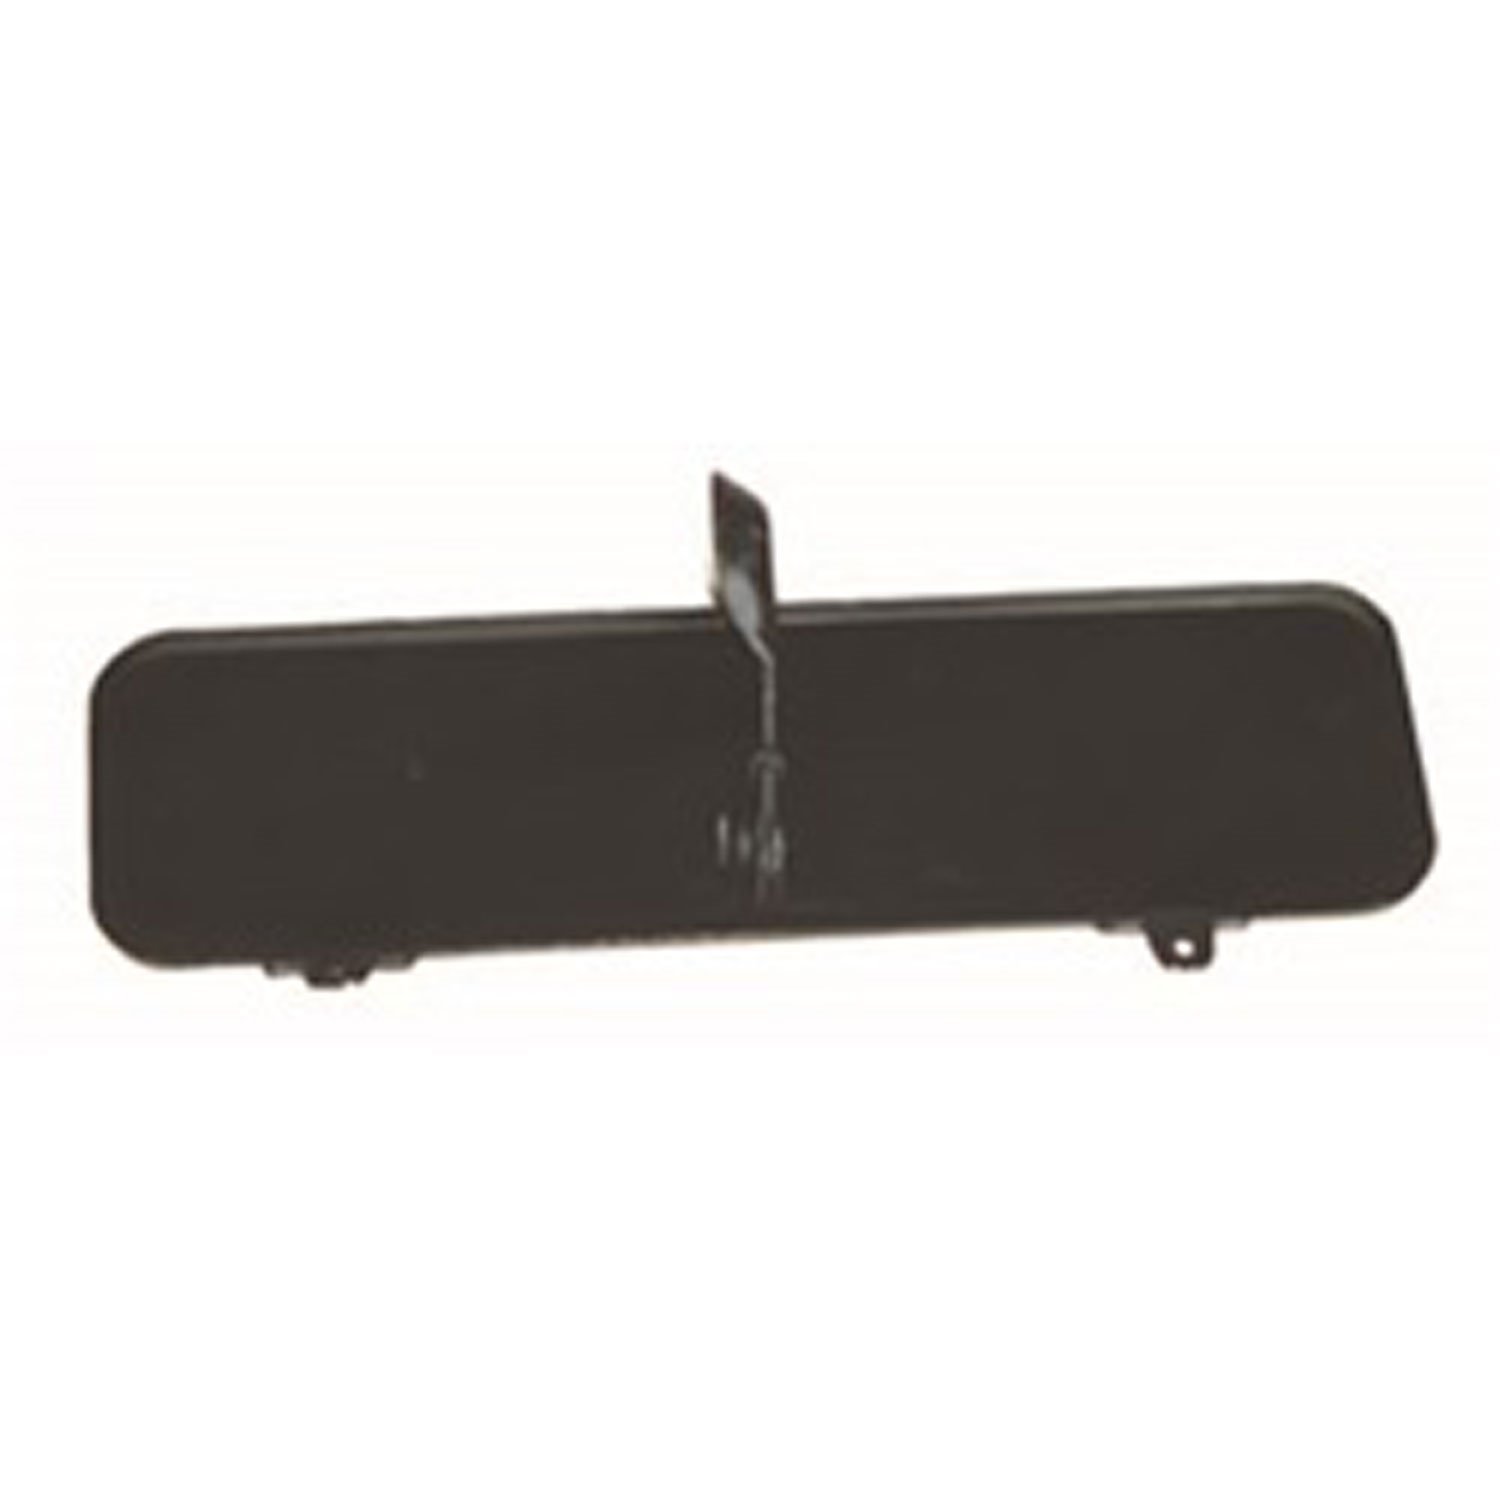 This windshield ventilation cover kit from Omix-ADA includes the handle and spring. Fits 49-53 Willys CJ3A.